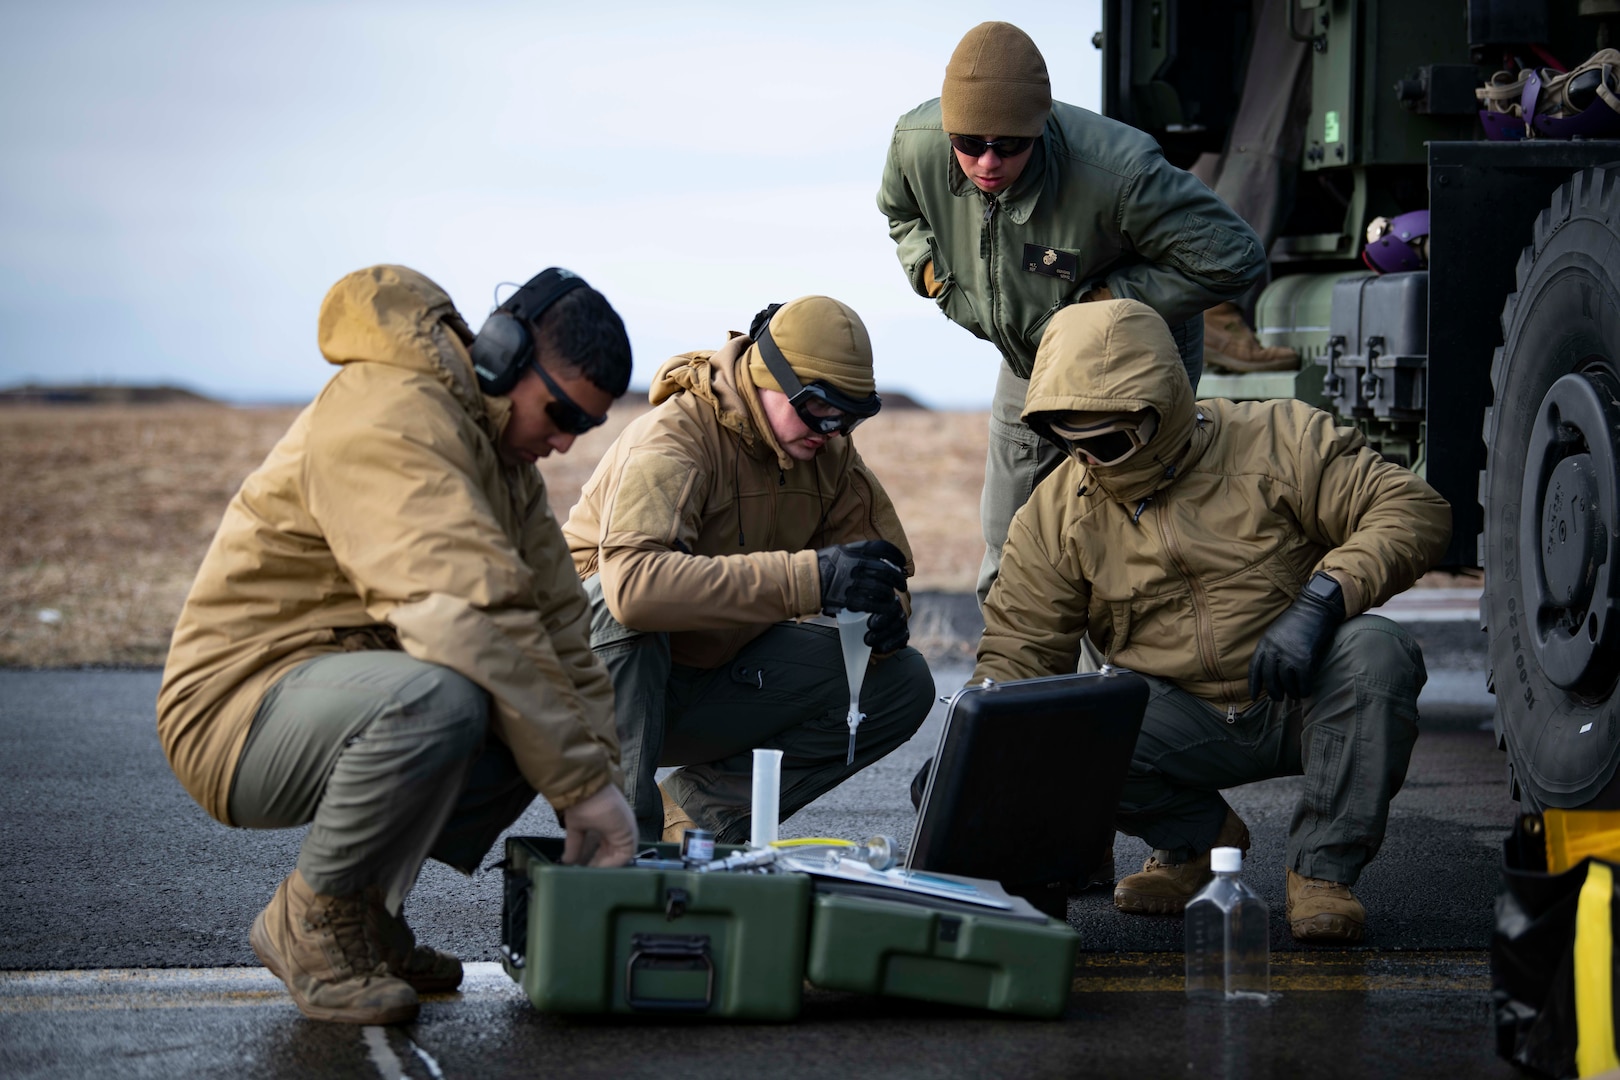 Sgt. Matthew Dungan, center right, a native of Lebanon, Missouri, assigned to Marine Wing Support Squadron (MWSS) 271, monitors members of MWSS 271 and Navy Cargo Handling Battalion (NCHB) 1 testing fuel during a fixed wing refueling operation.